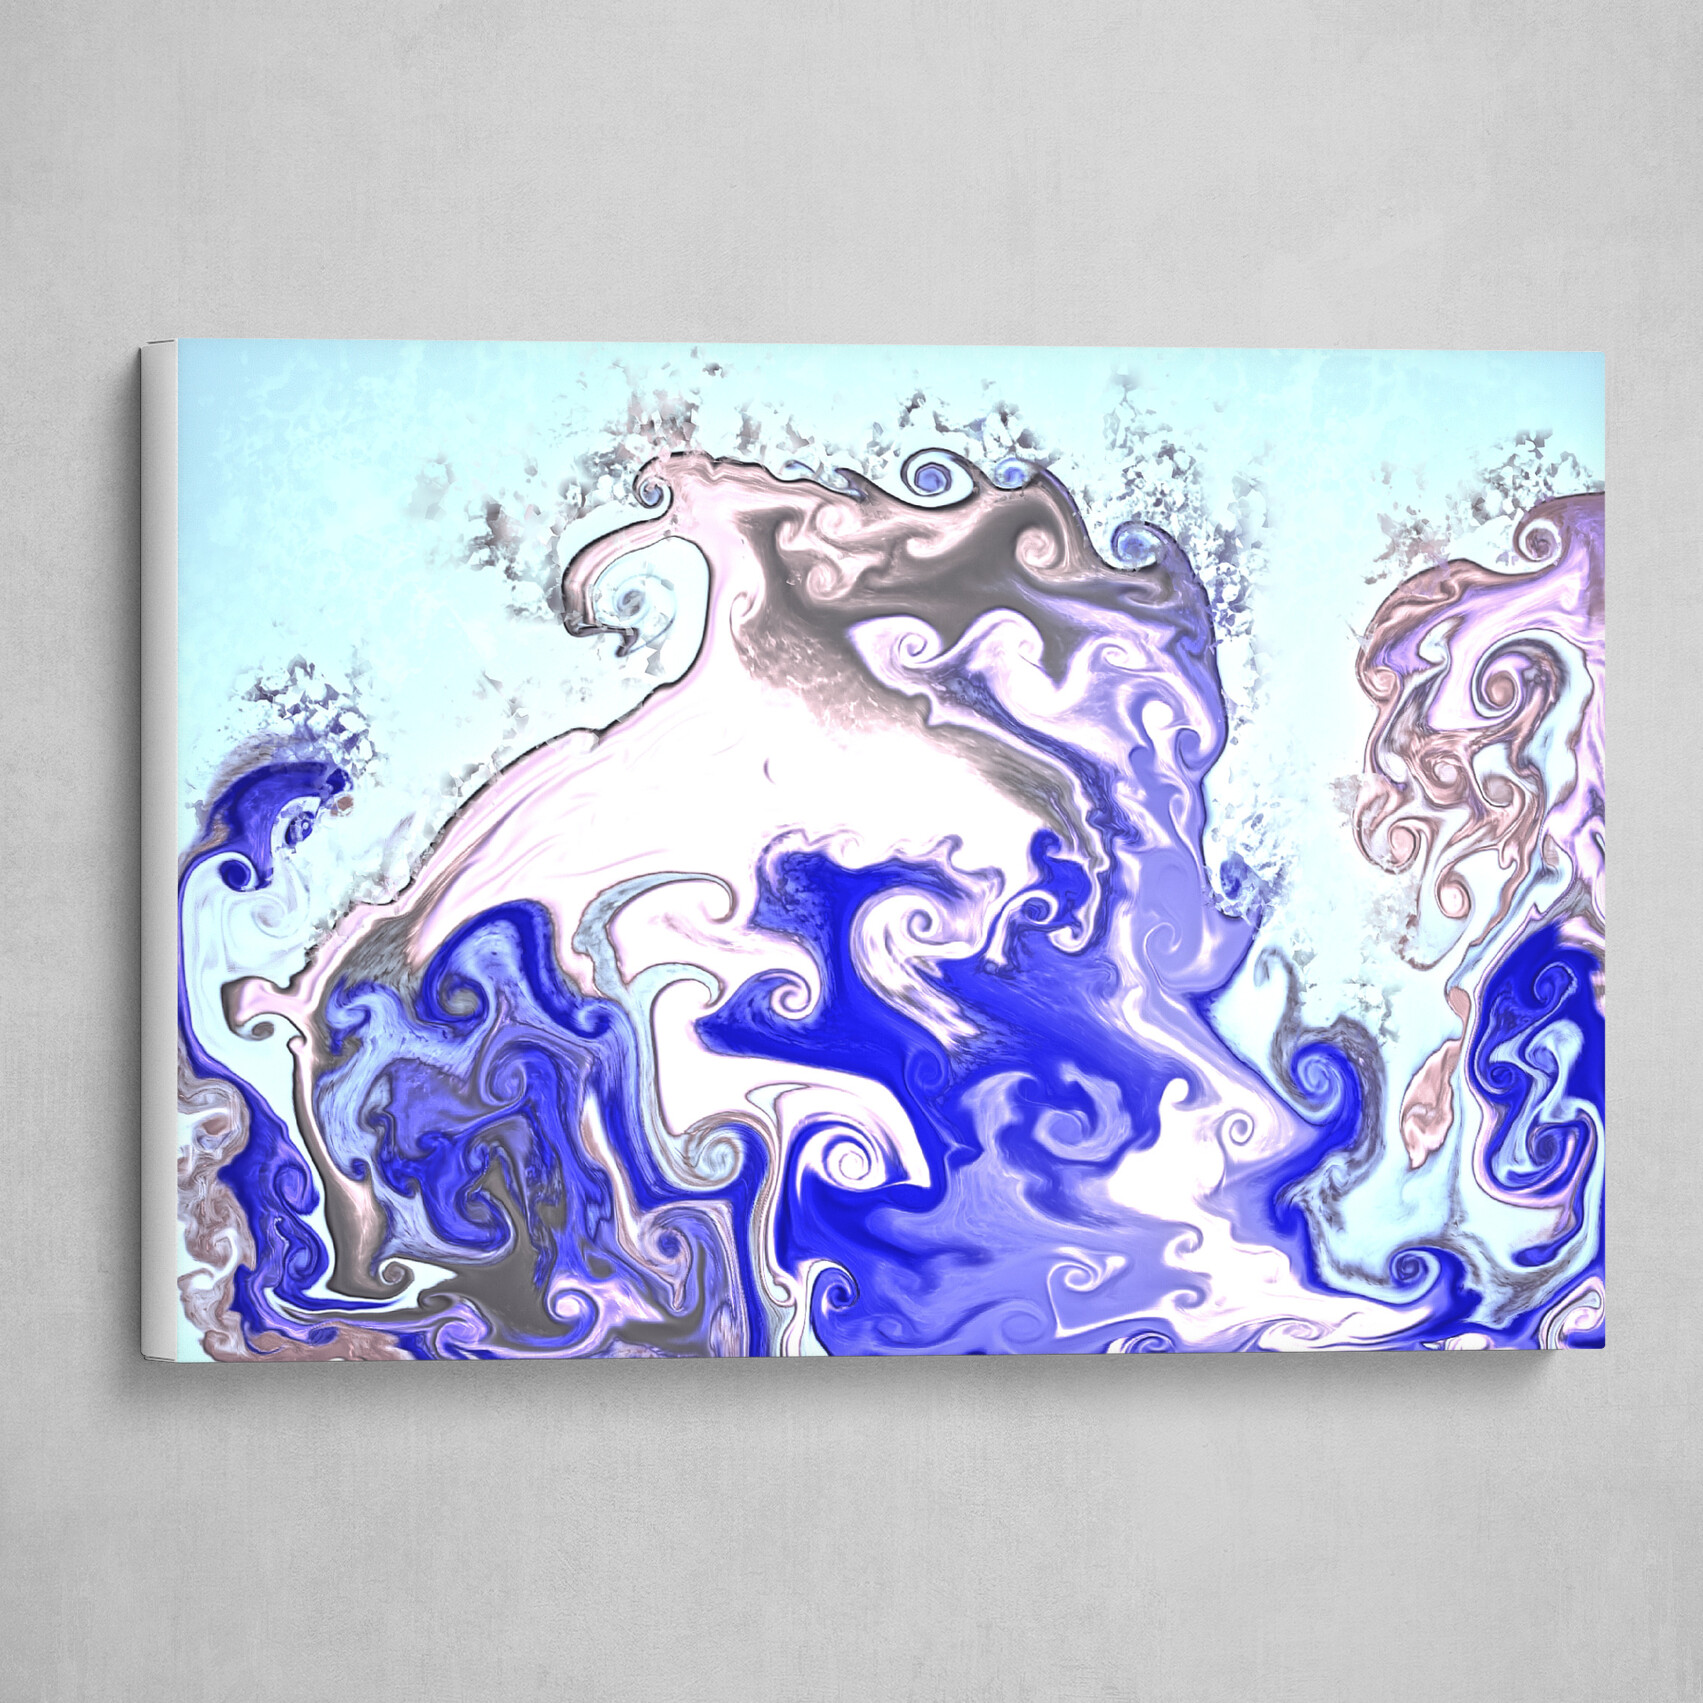 Purple and light blue fluid pour abstract art 5